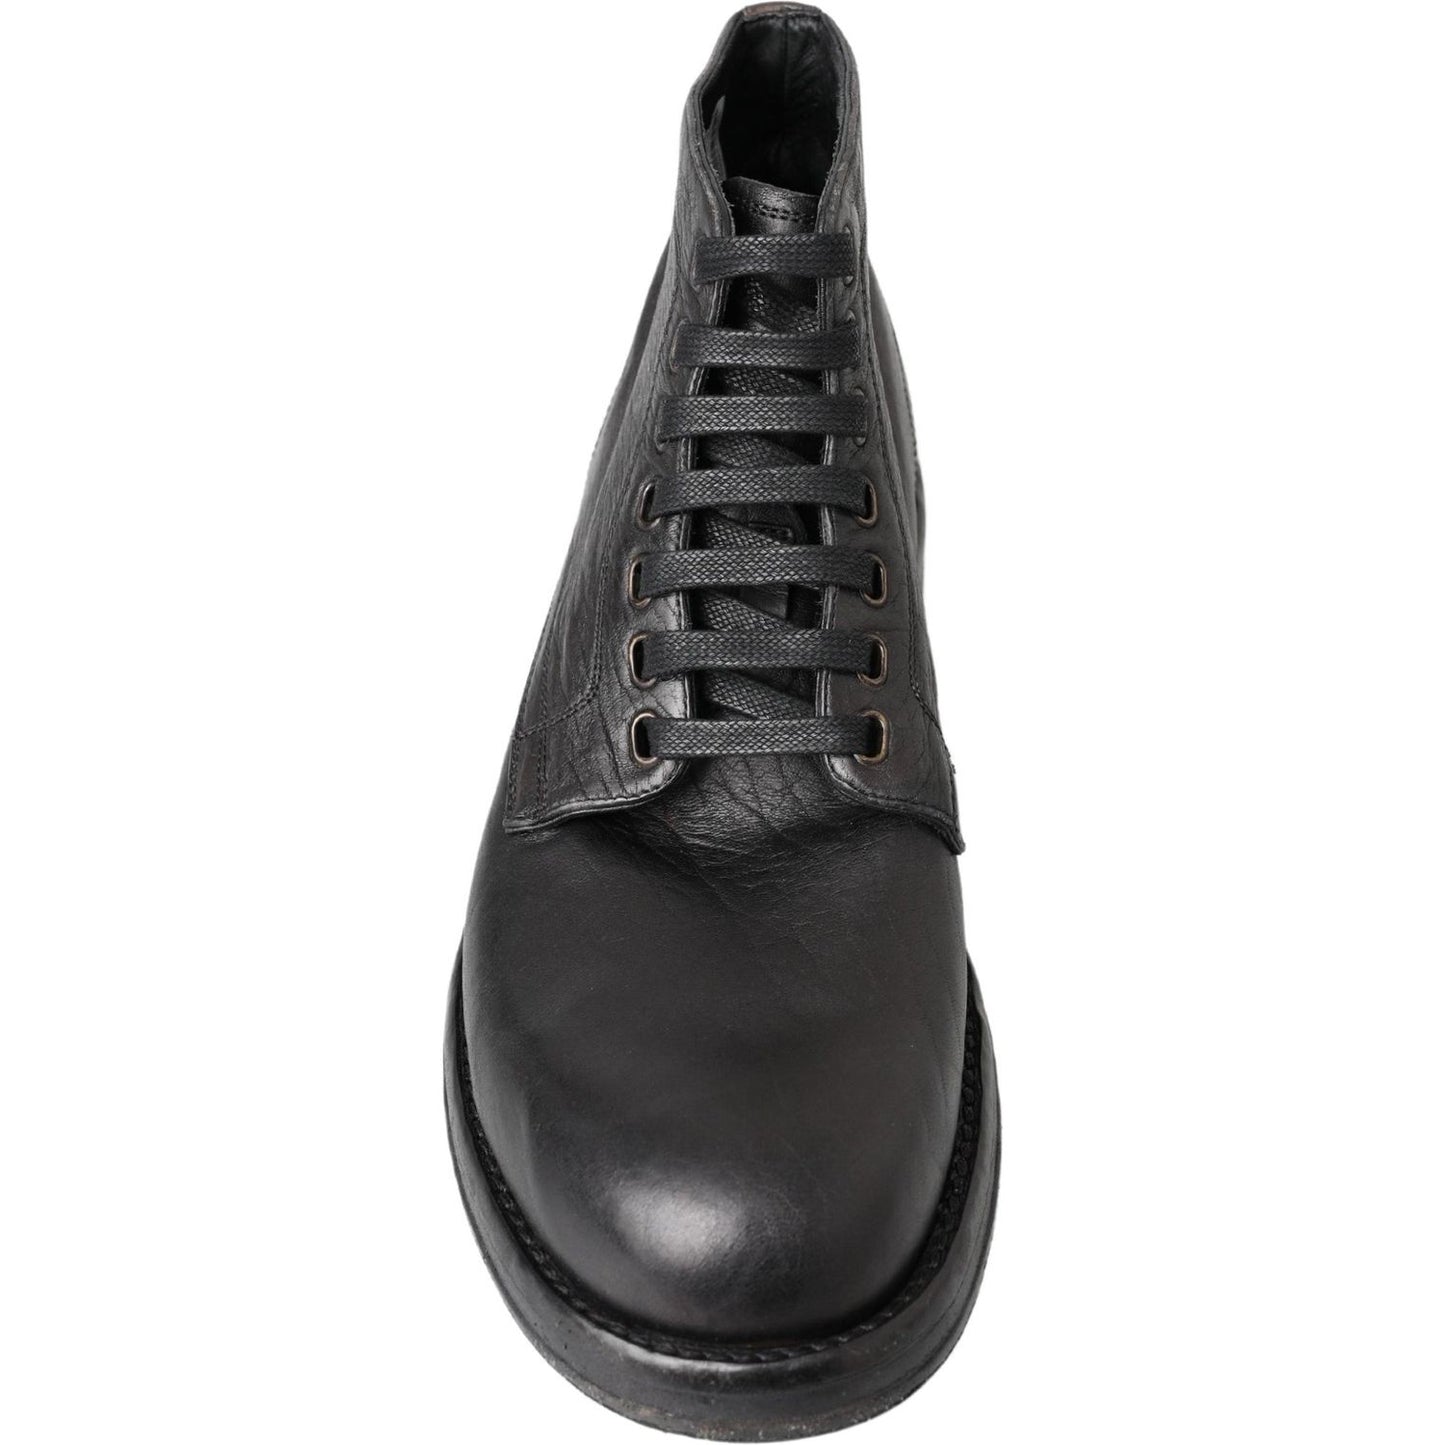 Dolce & Gabbana Equisite Black Lace-Up Leather Boots black-horse-leather-perugino-boots